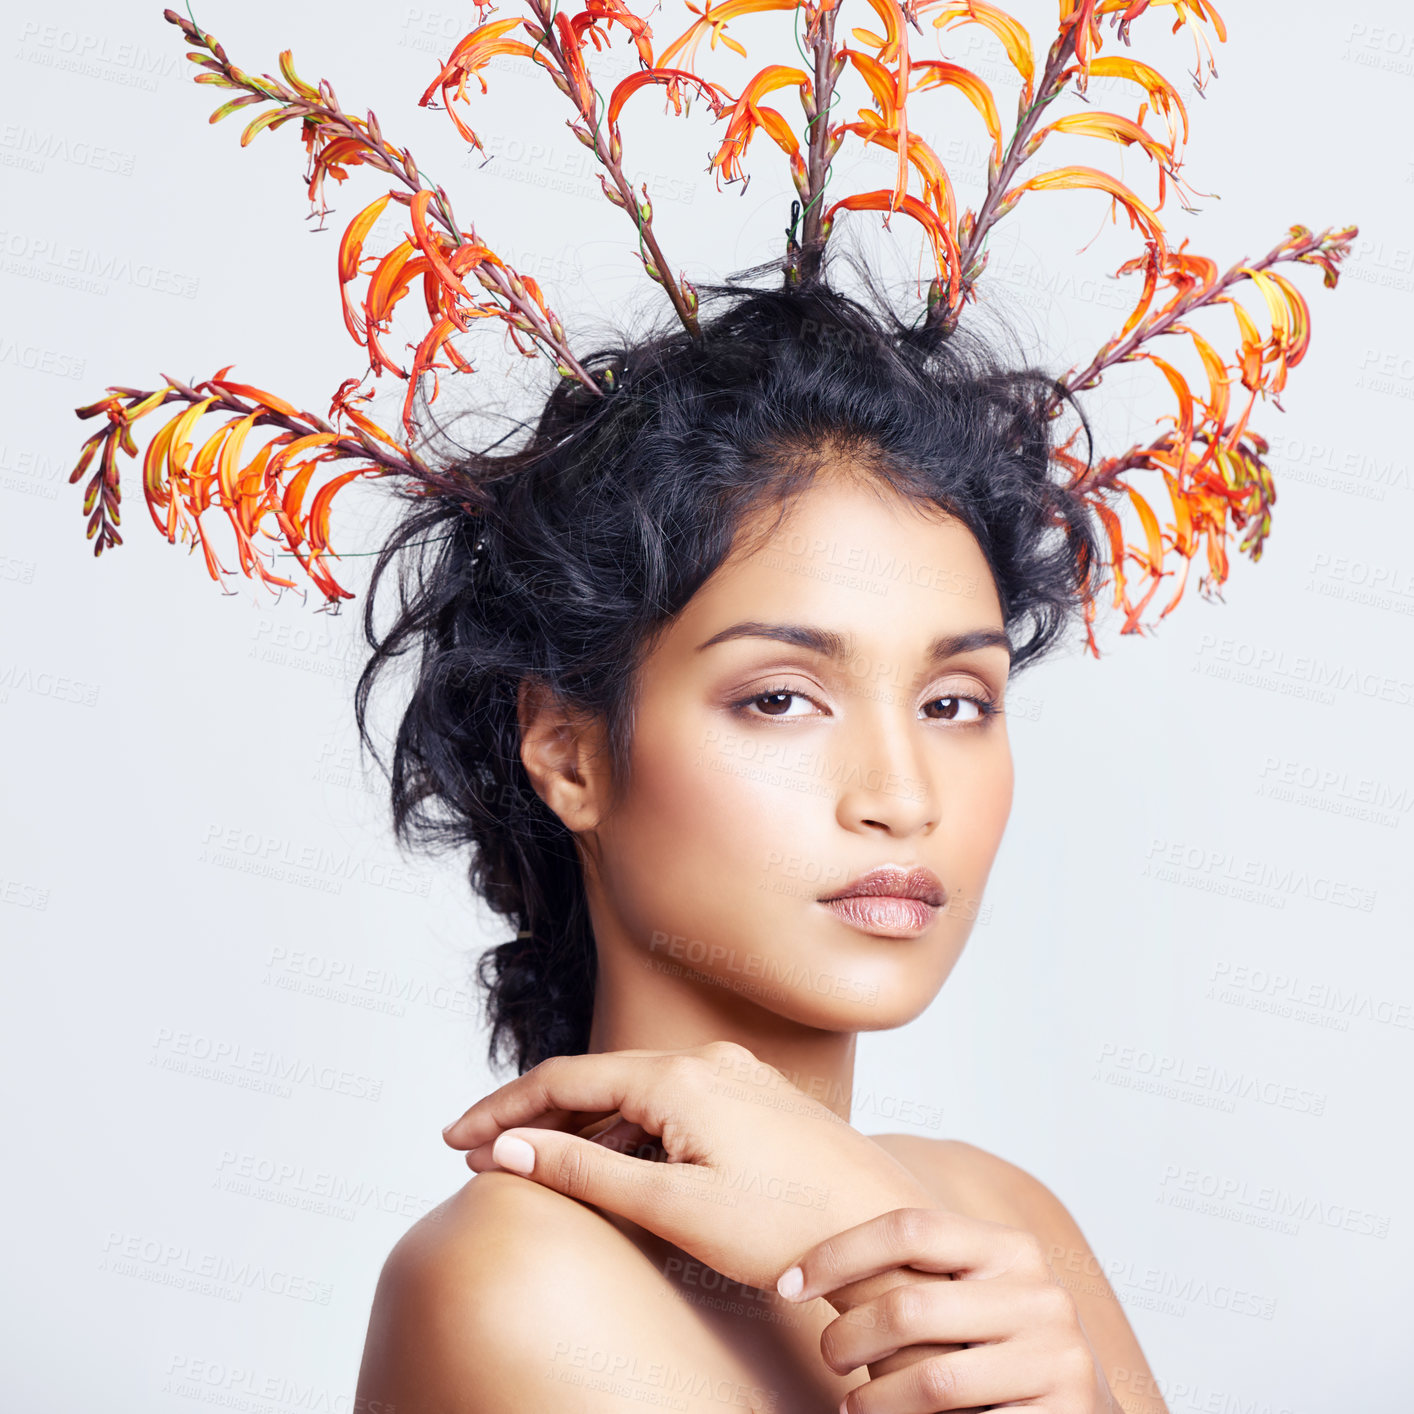 Buy stock photo Studio shot of a beautiful young woman with colorful branches in her hair